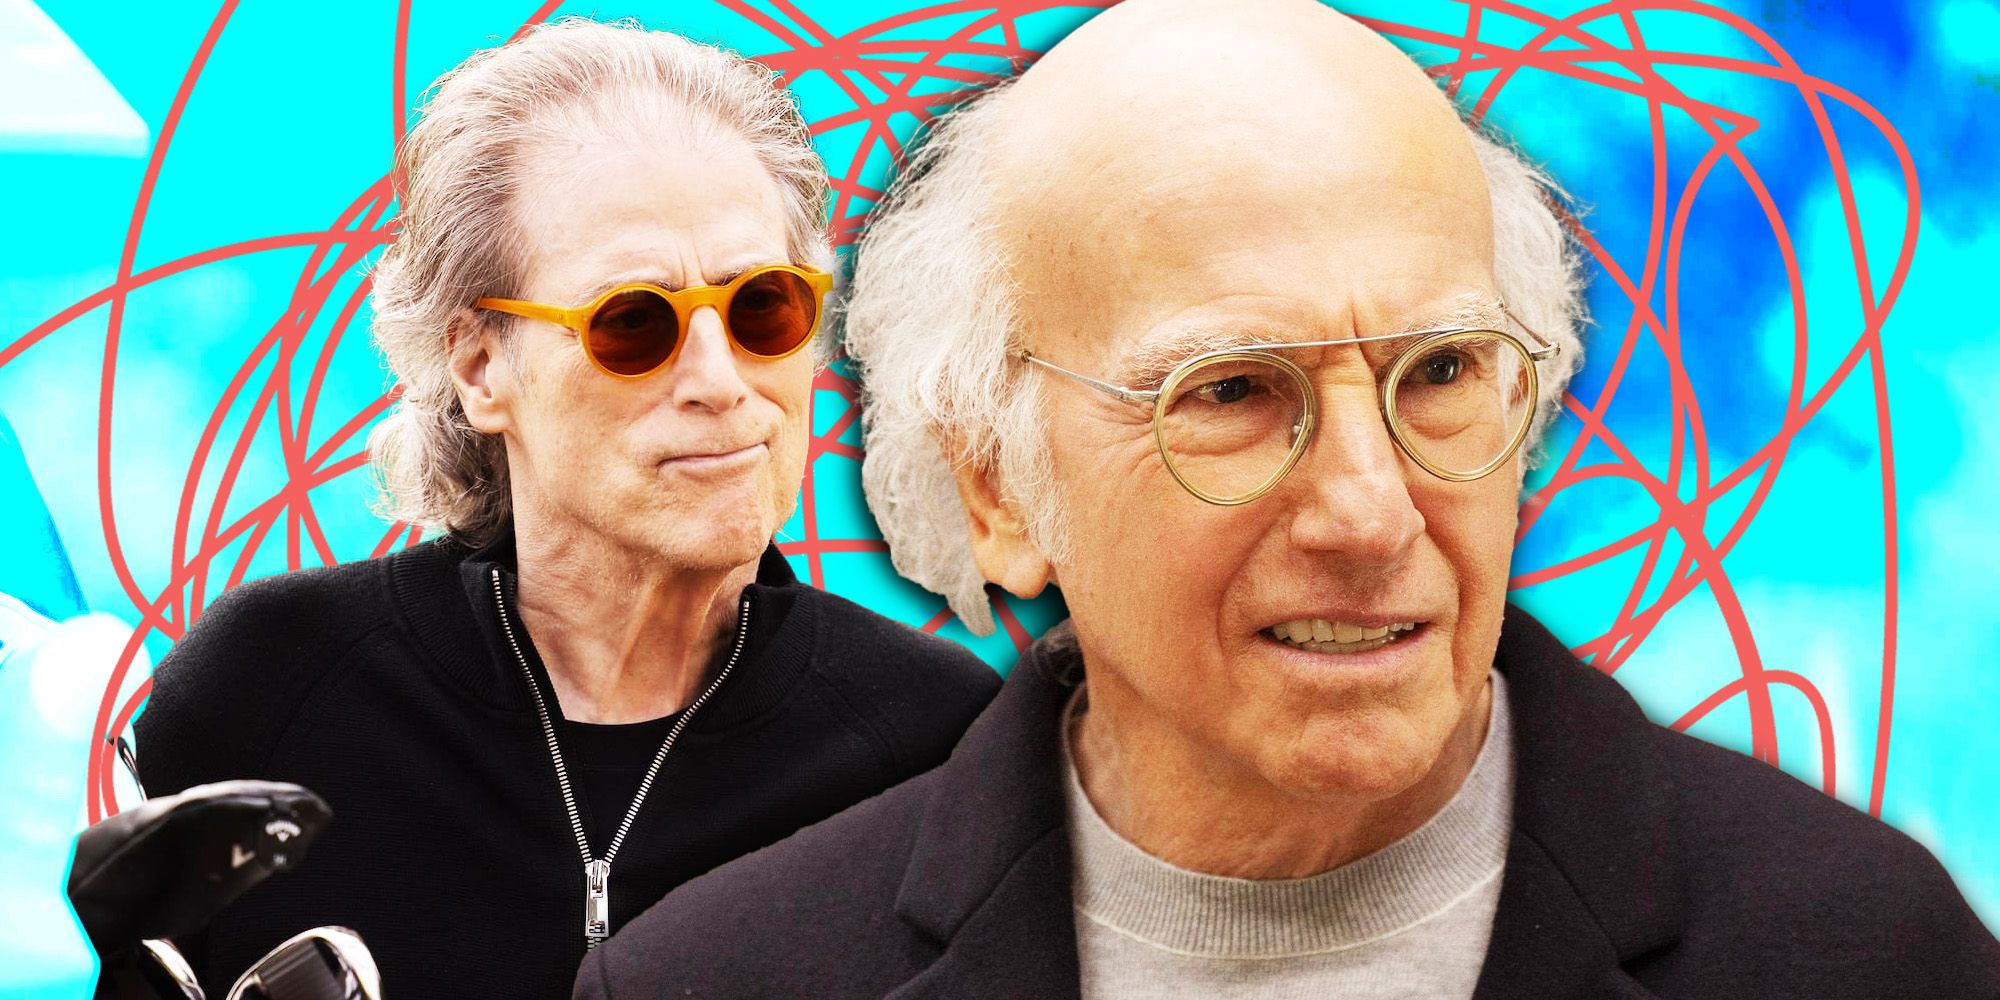 Larry David & Richard Lewis in Curb Your Enthusiasm